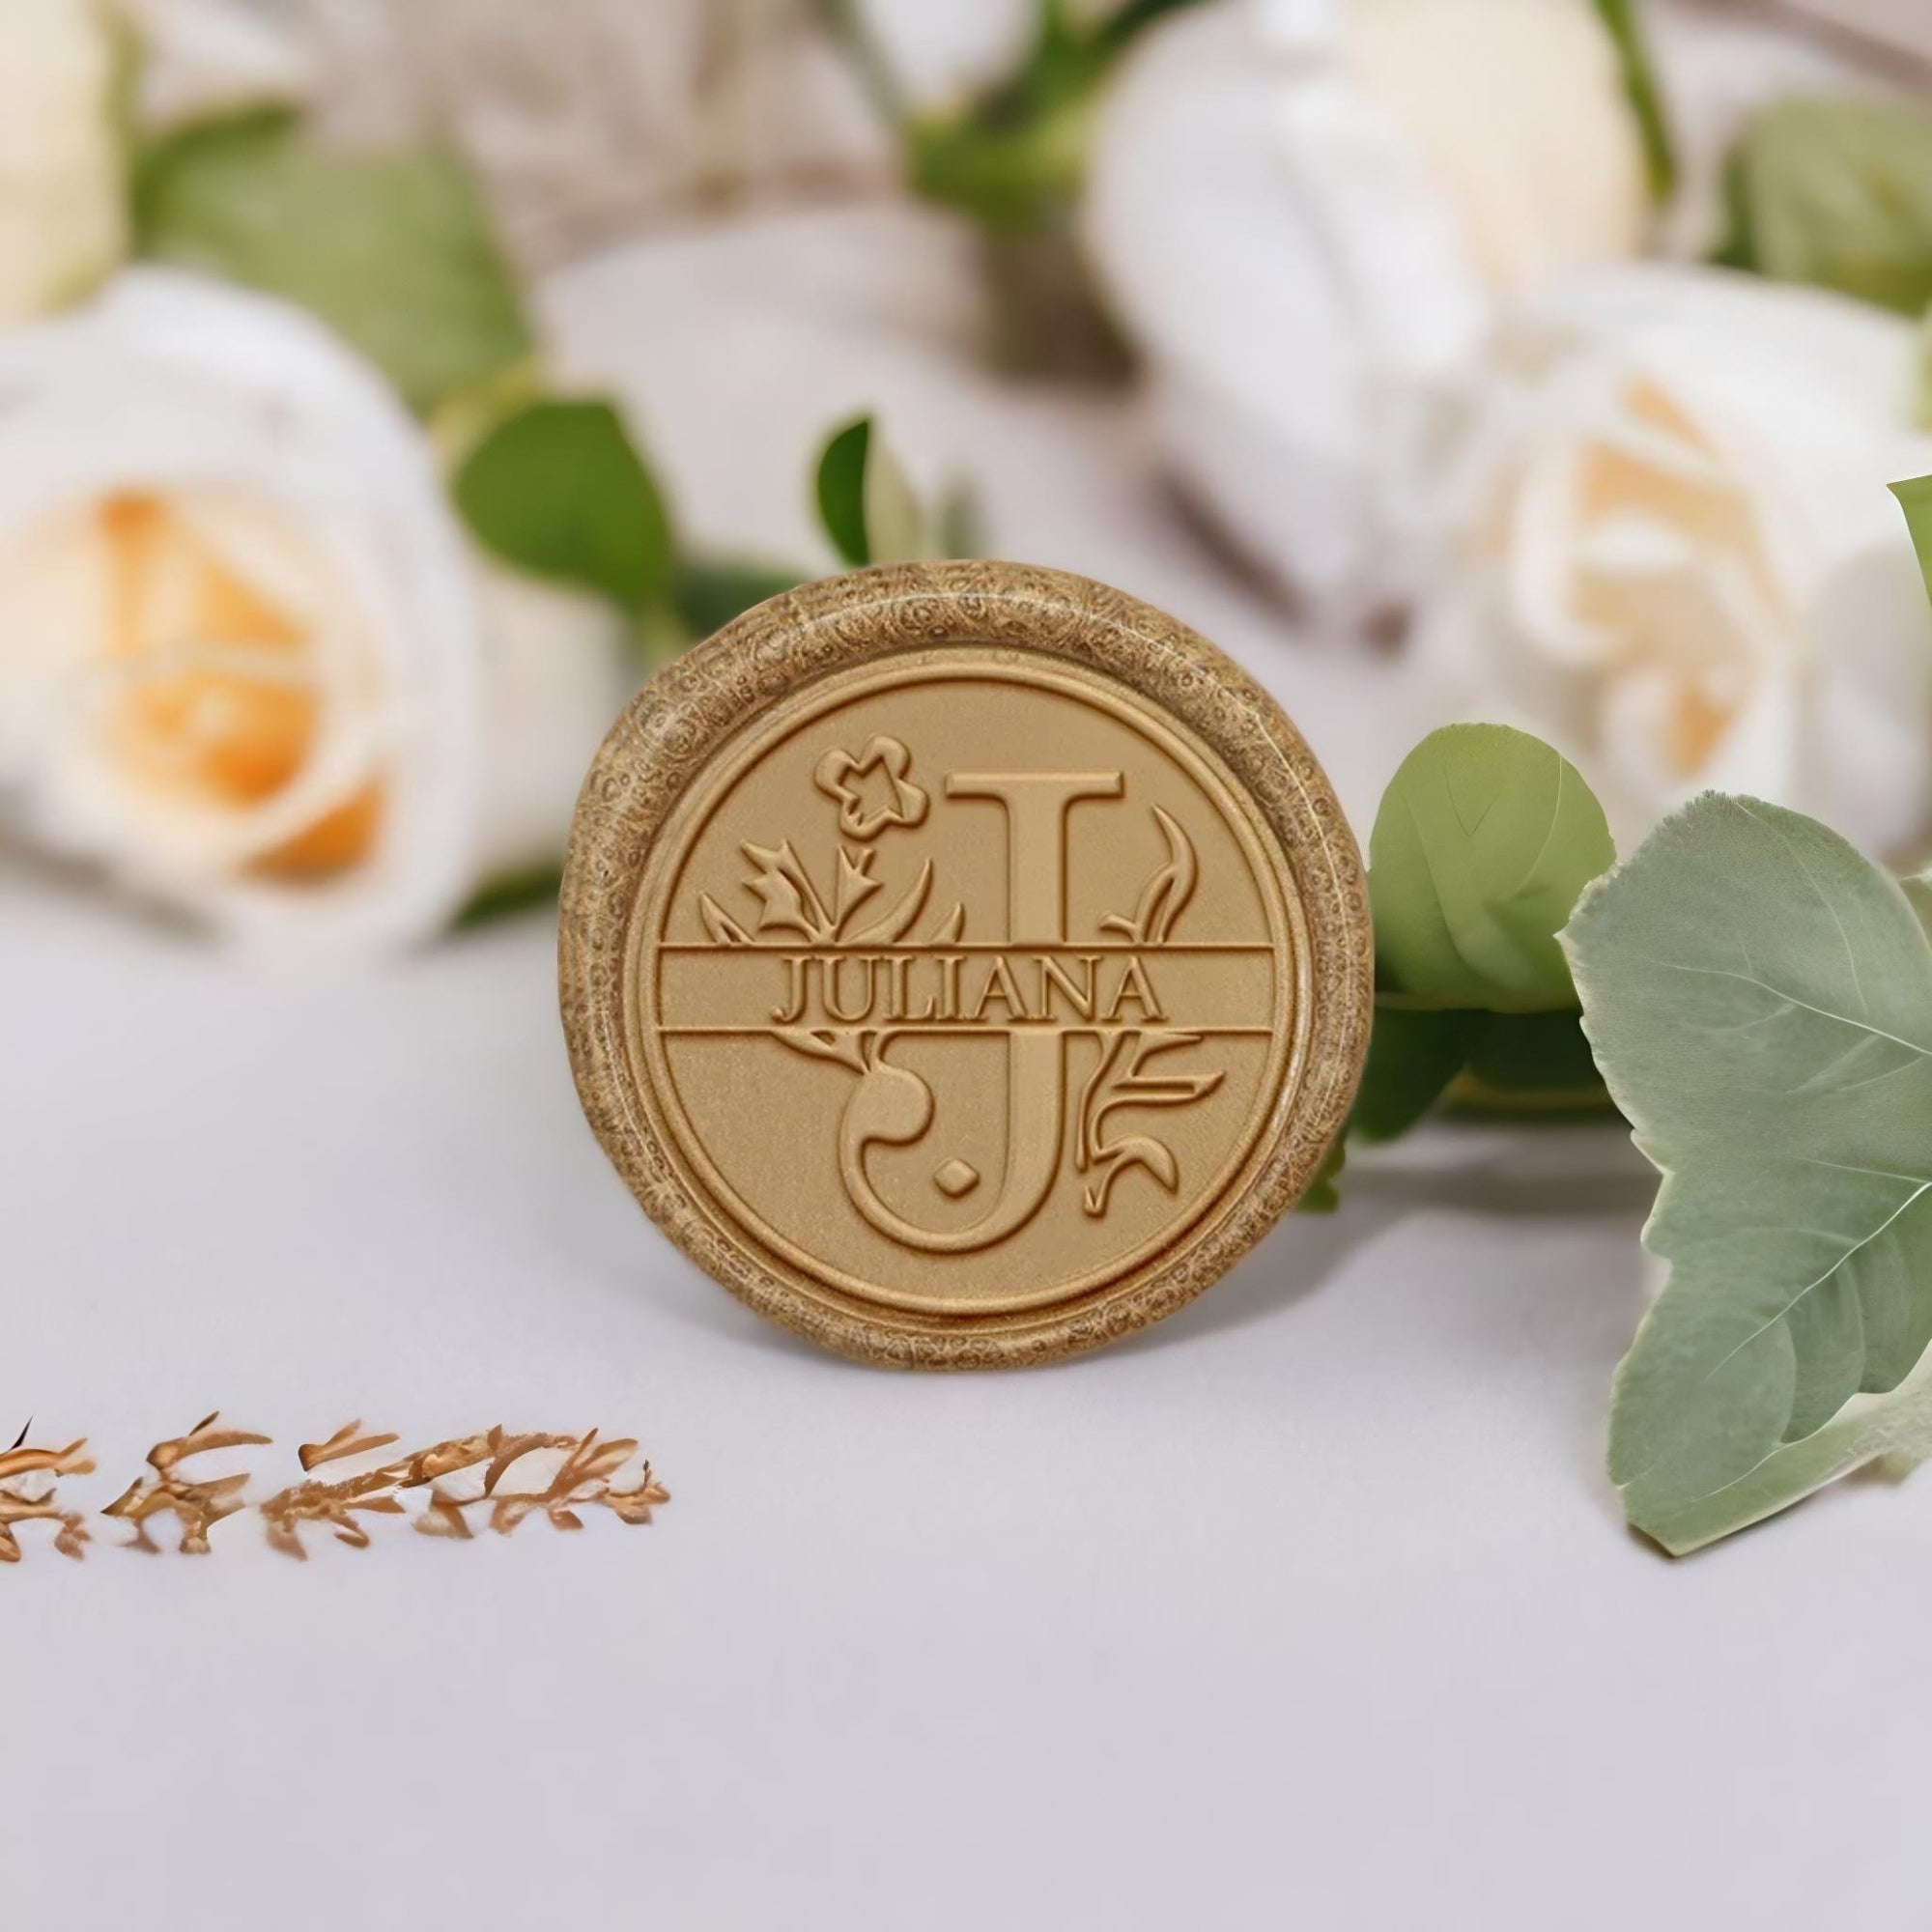 Custom Wax Seal Stamp Personalized Name/Text/Letter/Image/Logo